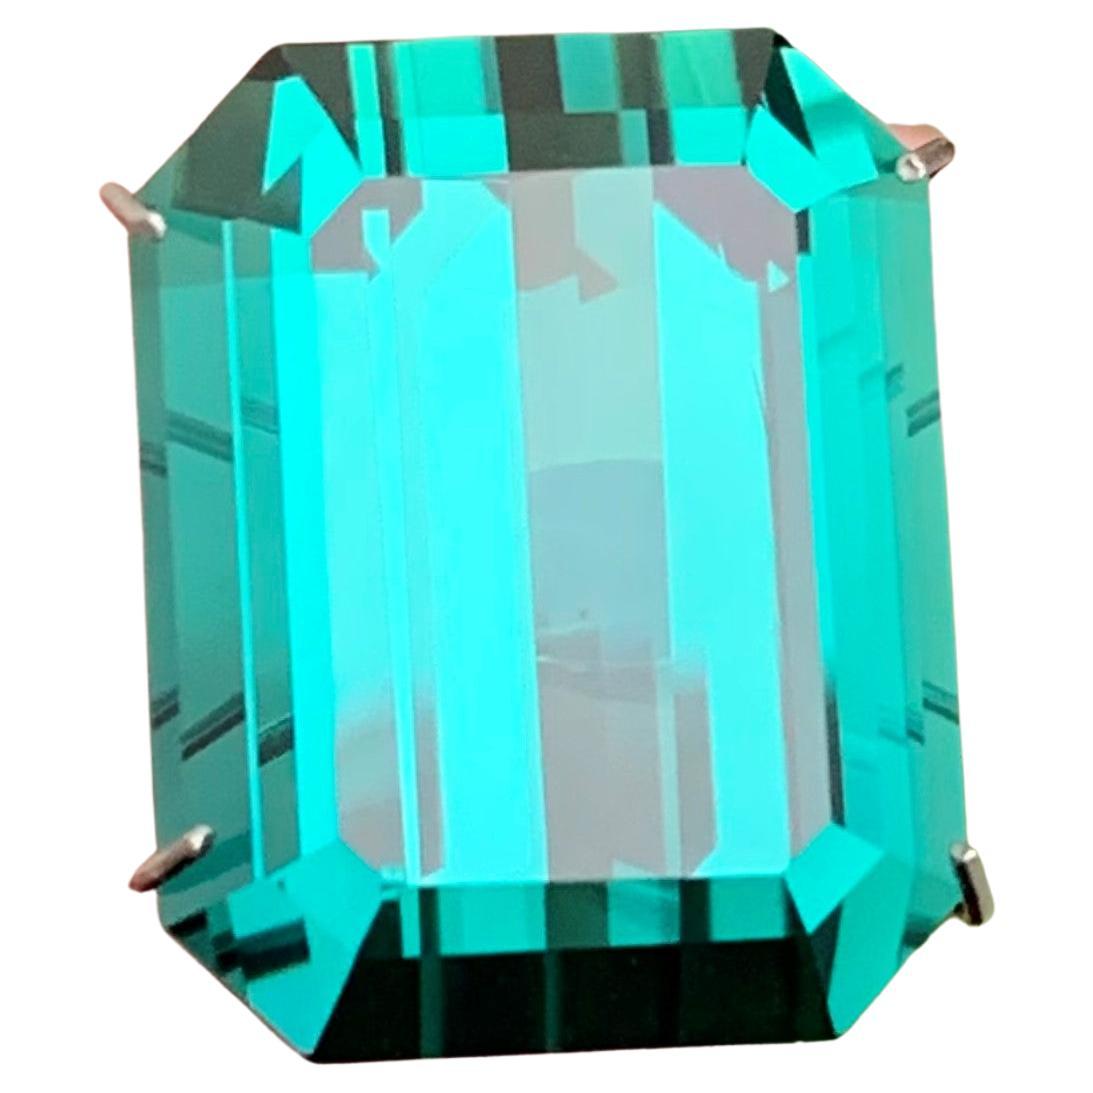 Gemstone Type : Tourmaline
Weight : 15.30 Carats
Dimensions : 15.7x12.3x9 Mm
Origin : Kunar Afghanistan
Clarity : Loupe Clean
Shape: Emerald
Color: Lagoon Green 
Certificate: On Demand
Basically, mint tourmalines are tourmalines with pastel hues of